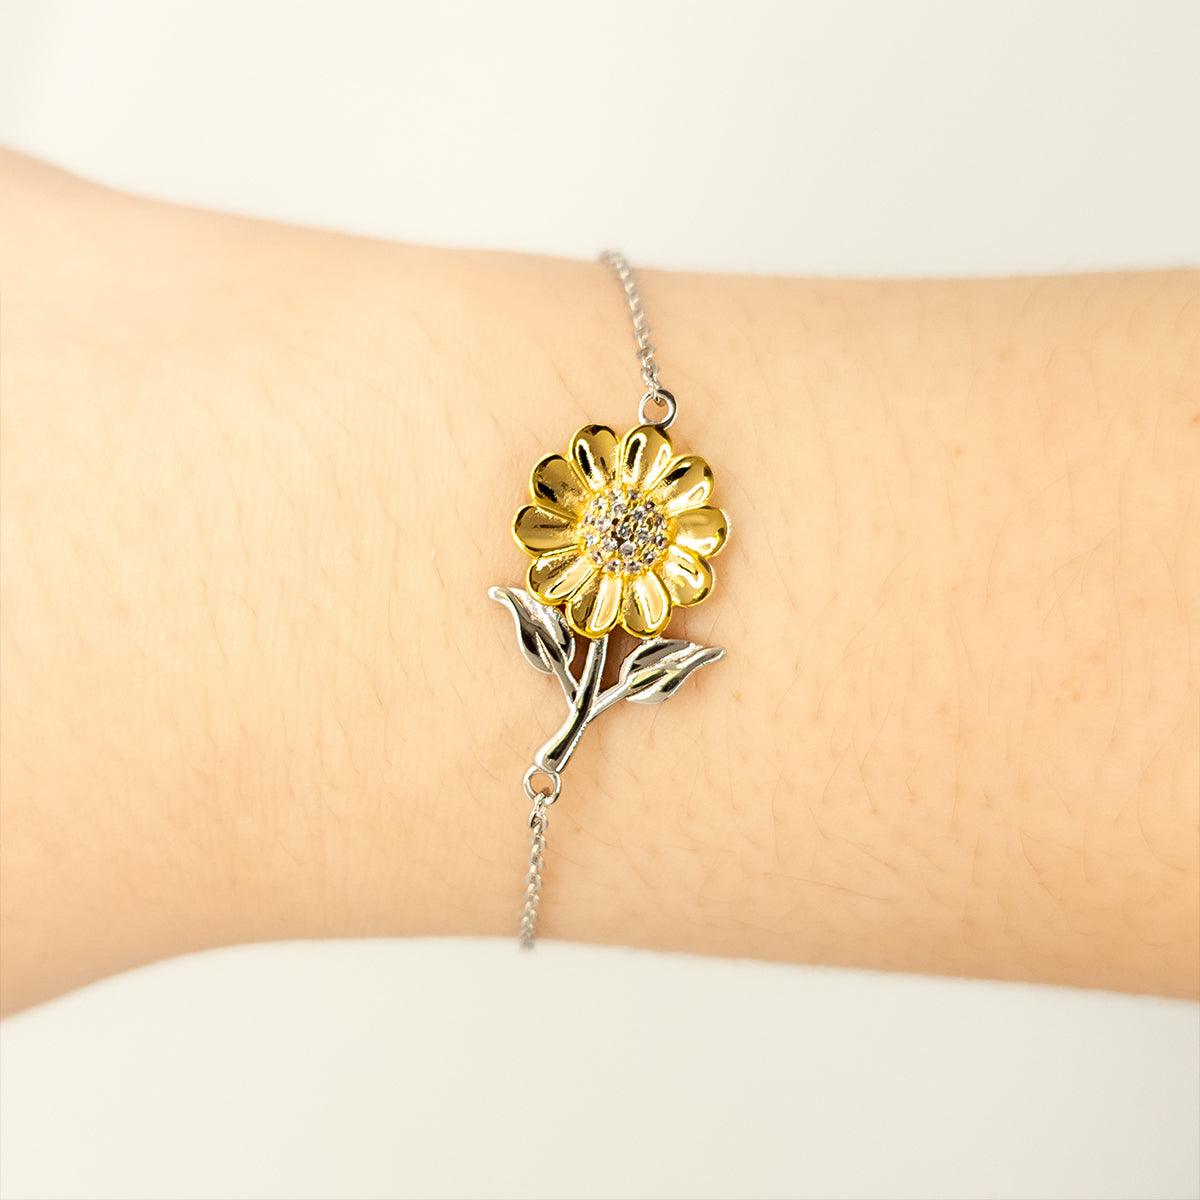 Sarcastic Database Administrator Sunflower Bracelet Gifts, Christmas Holiday Gifts for Database Administrator Birthday Message Card, Database Administrator: Because greatness is woven into the fabric of every day, Coworkers, Friends - Mallard Moon Gift Shop